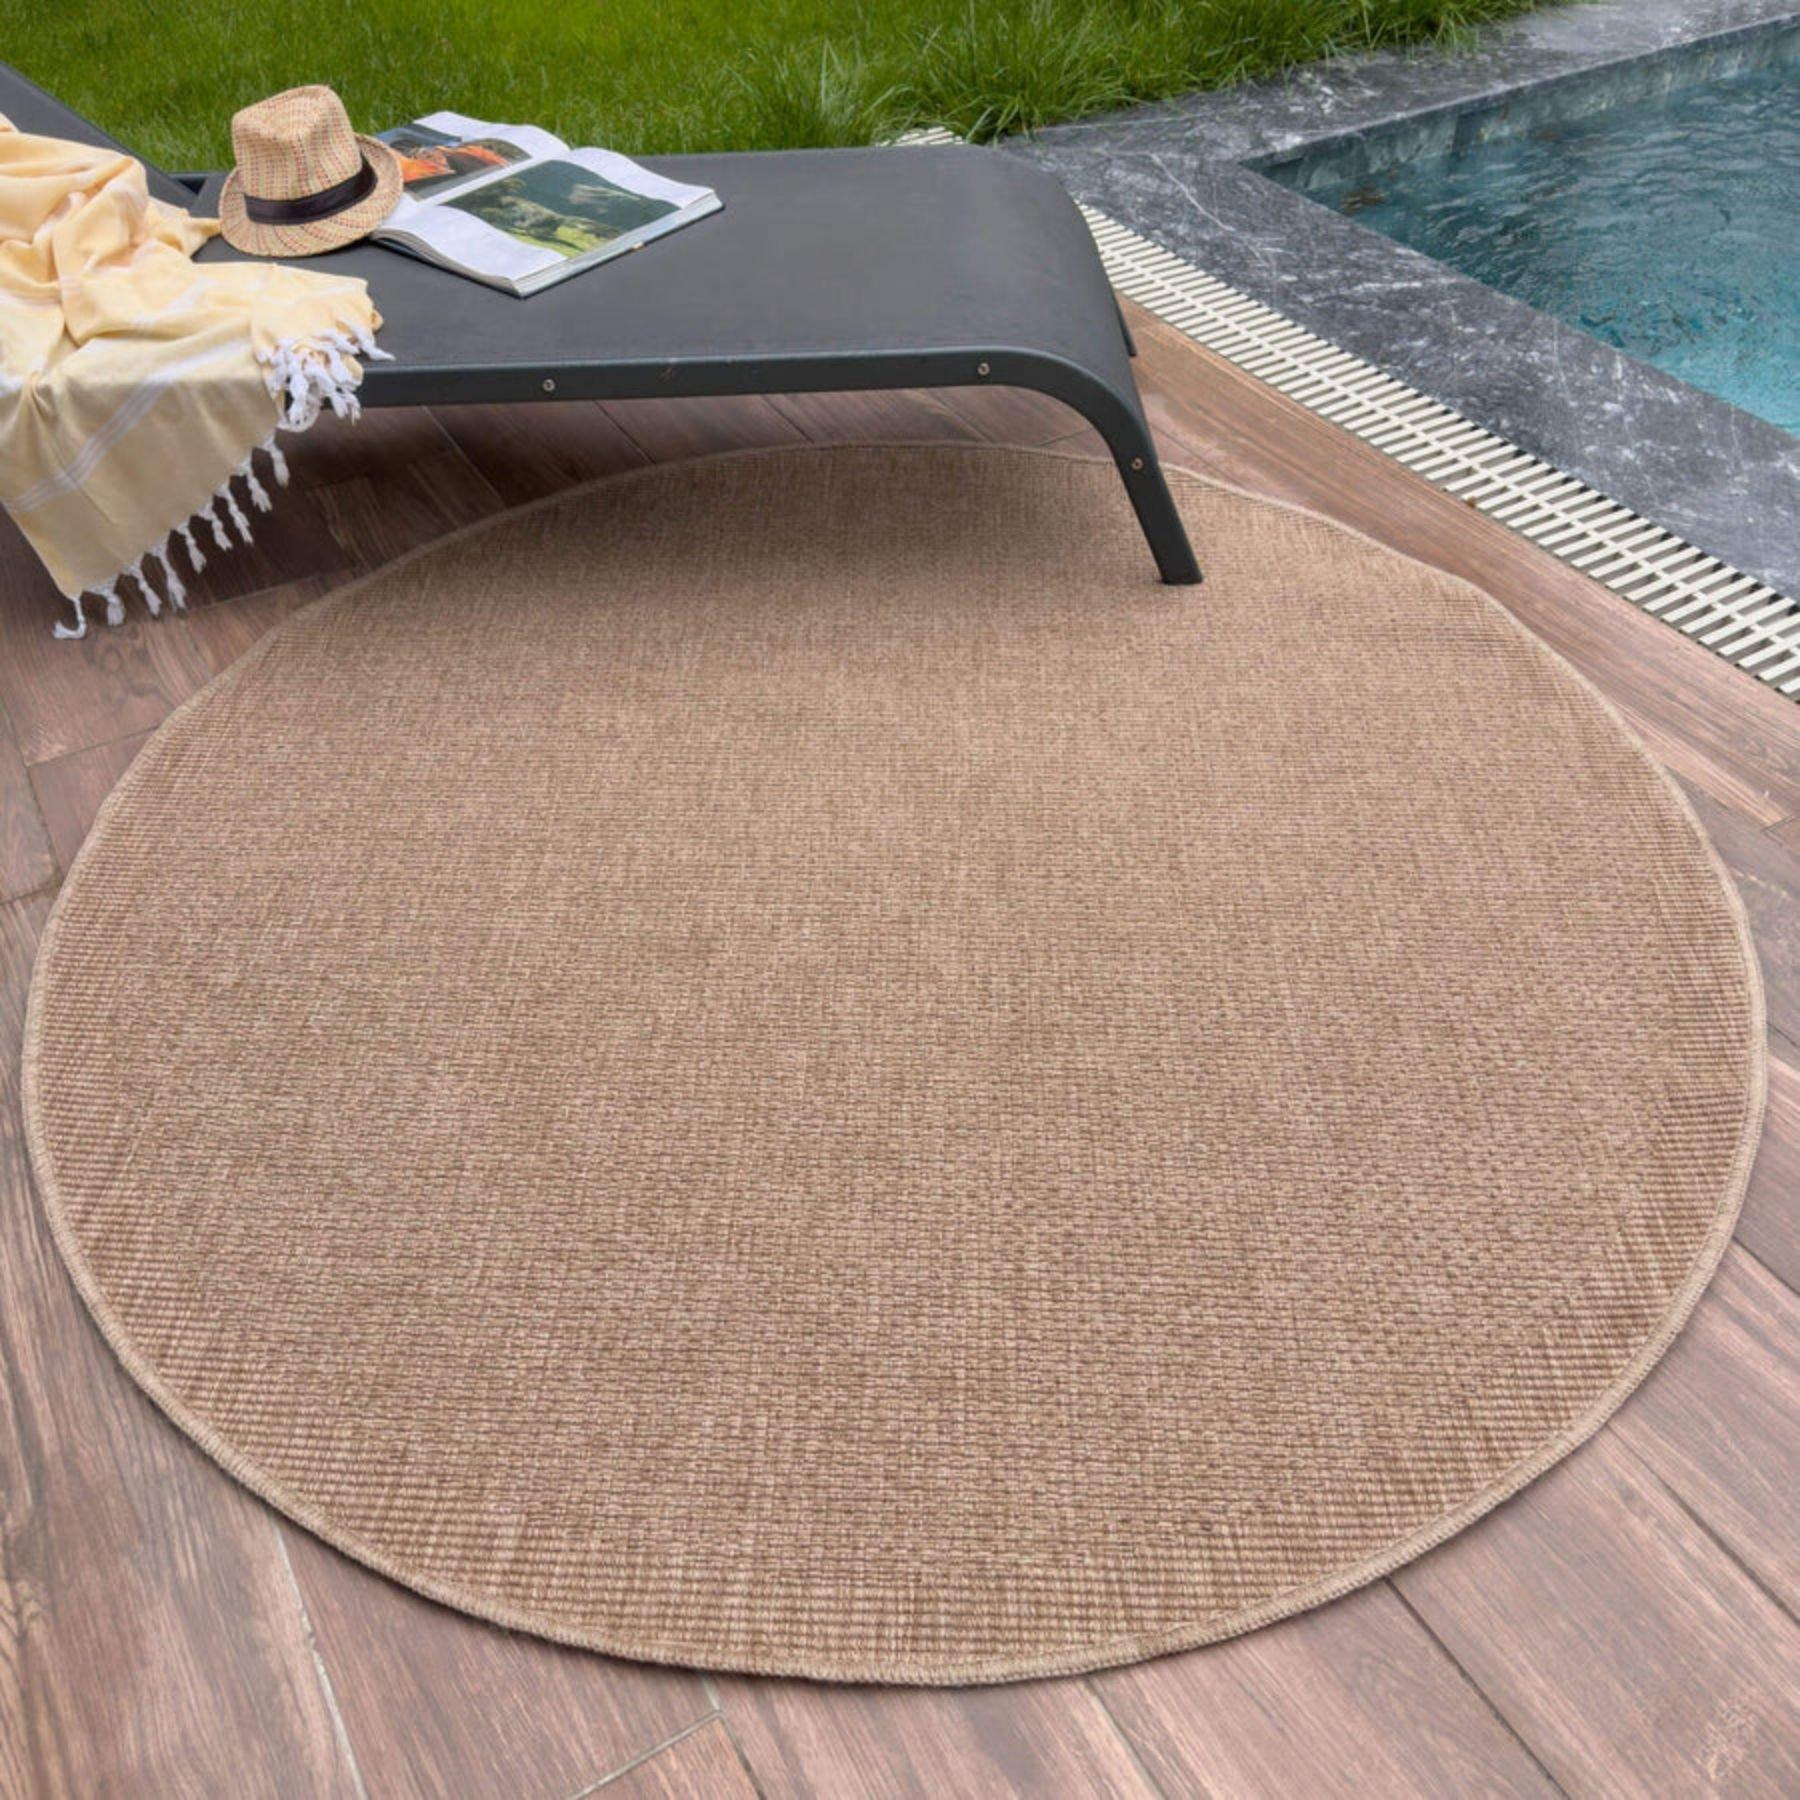 Nature Collection Outdoor Rugs in Neutral - 5200N - image 1